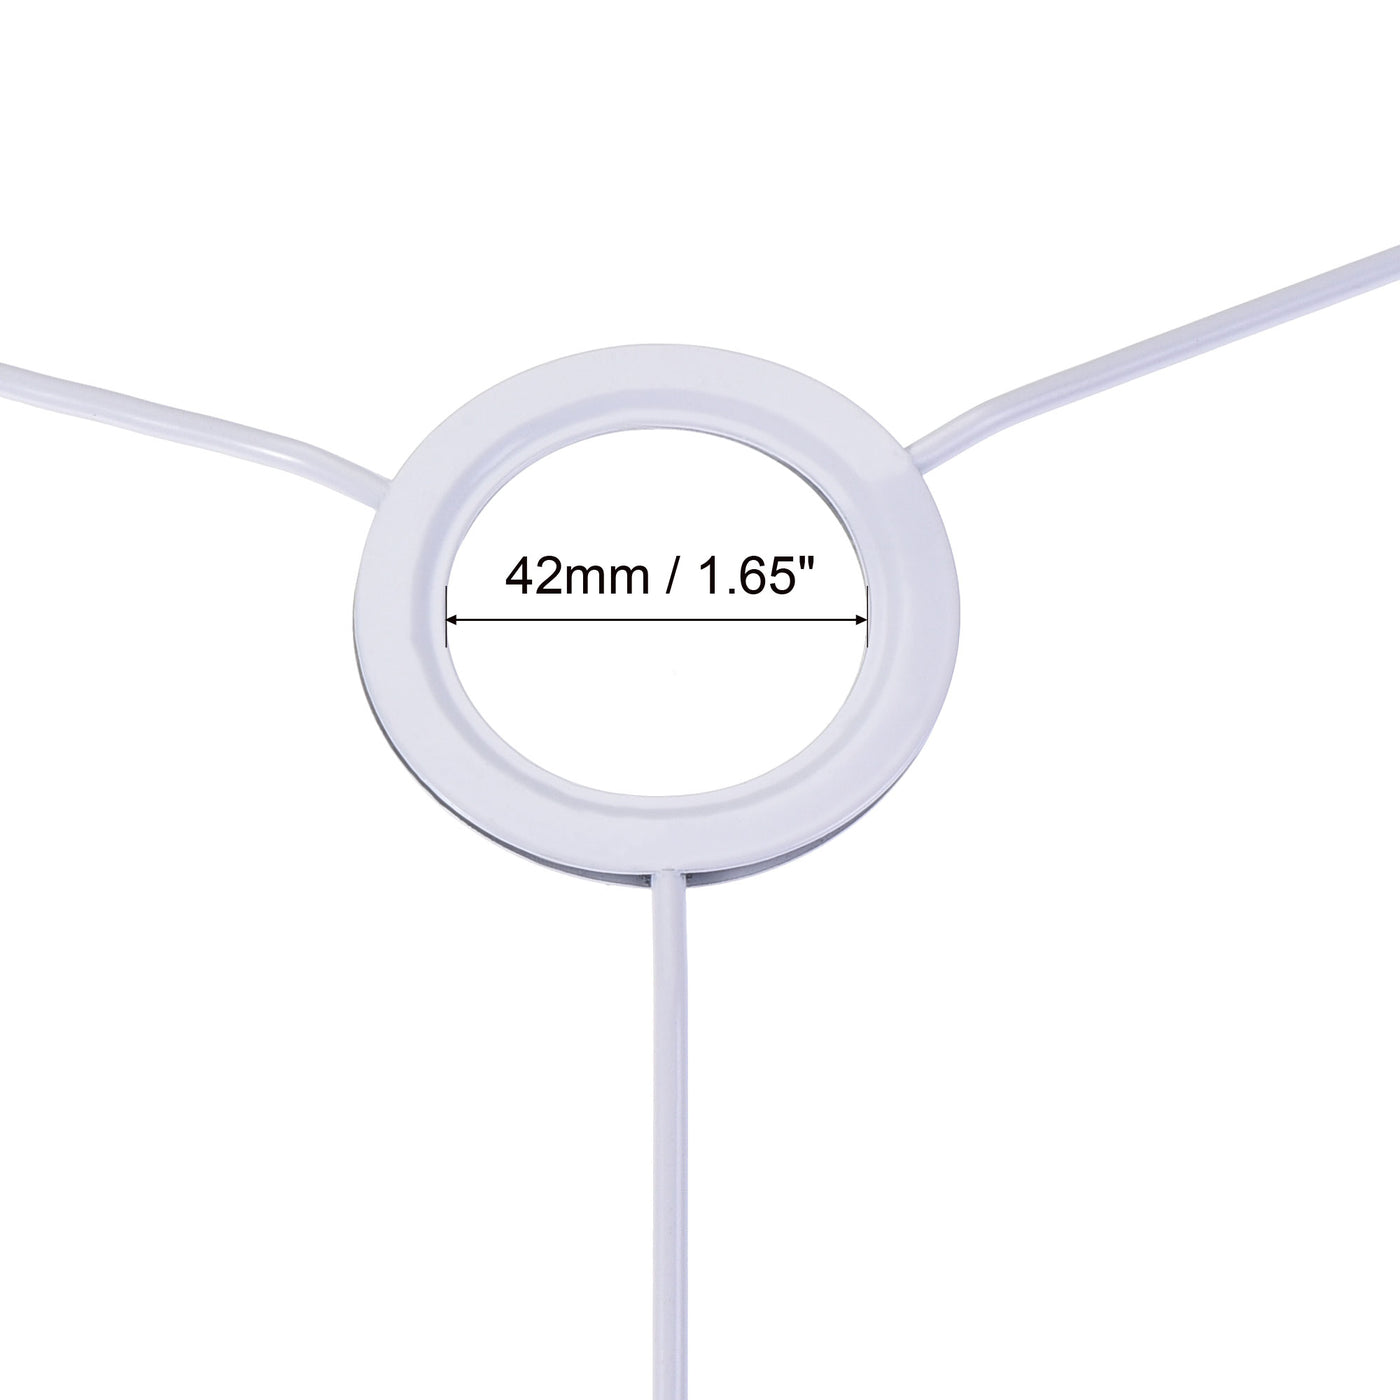 uxcell Uxcell Lamp Shade Ring, 300mm Dia. Lampshade Holder Frame Ring for E26/E27 Lamp Socket, Baked Coating Iron 2 Set